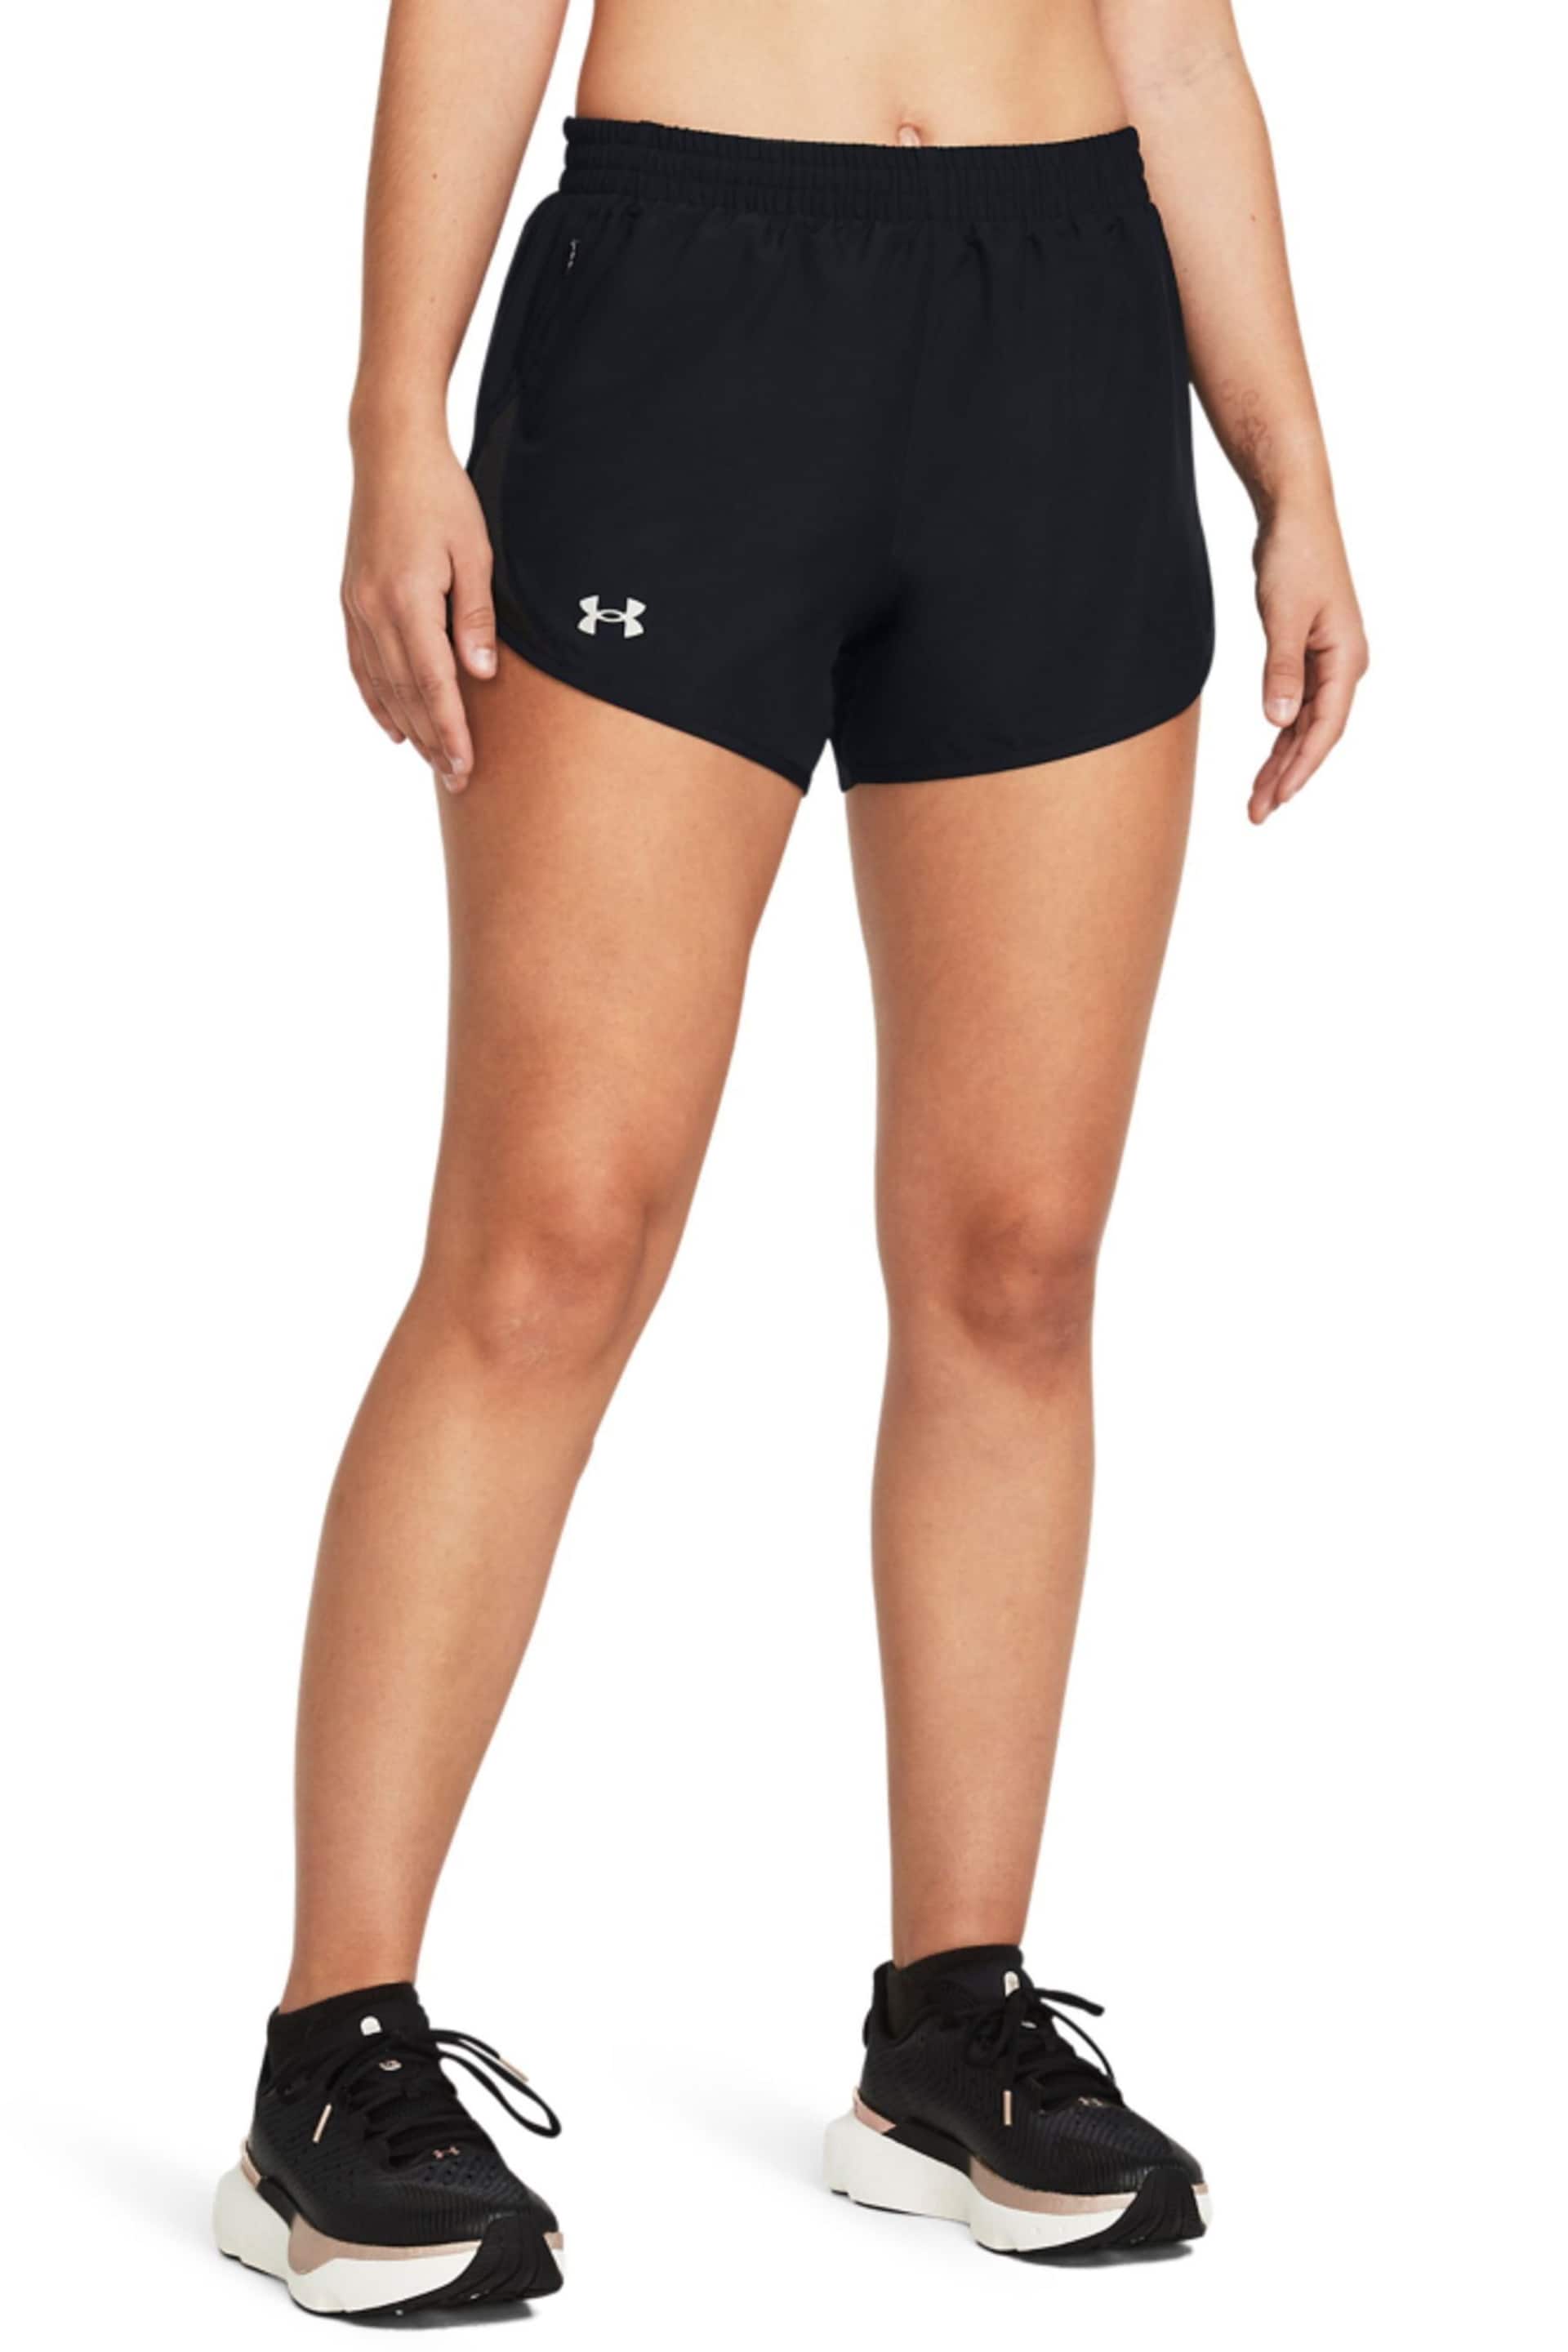 Under Armour Black Fly By 3'' Shorts - Image 1 of 5